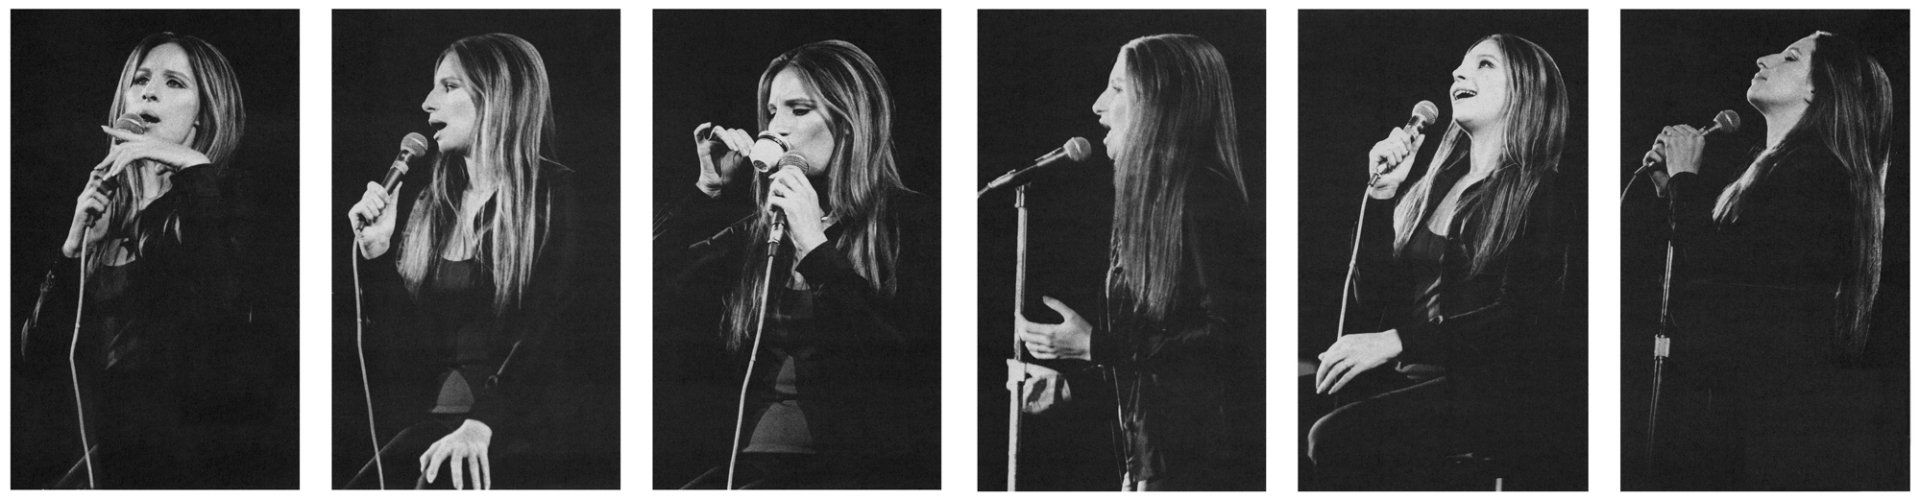 Six photos of Streisand singing live at the Forum, 1972.